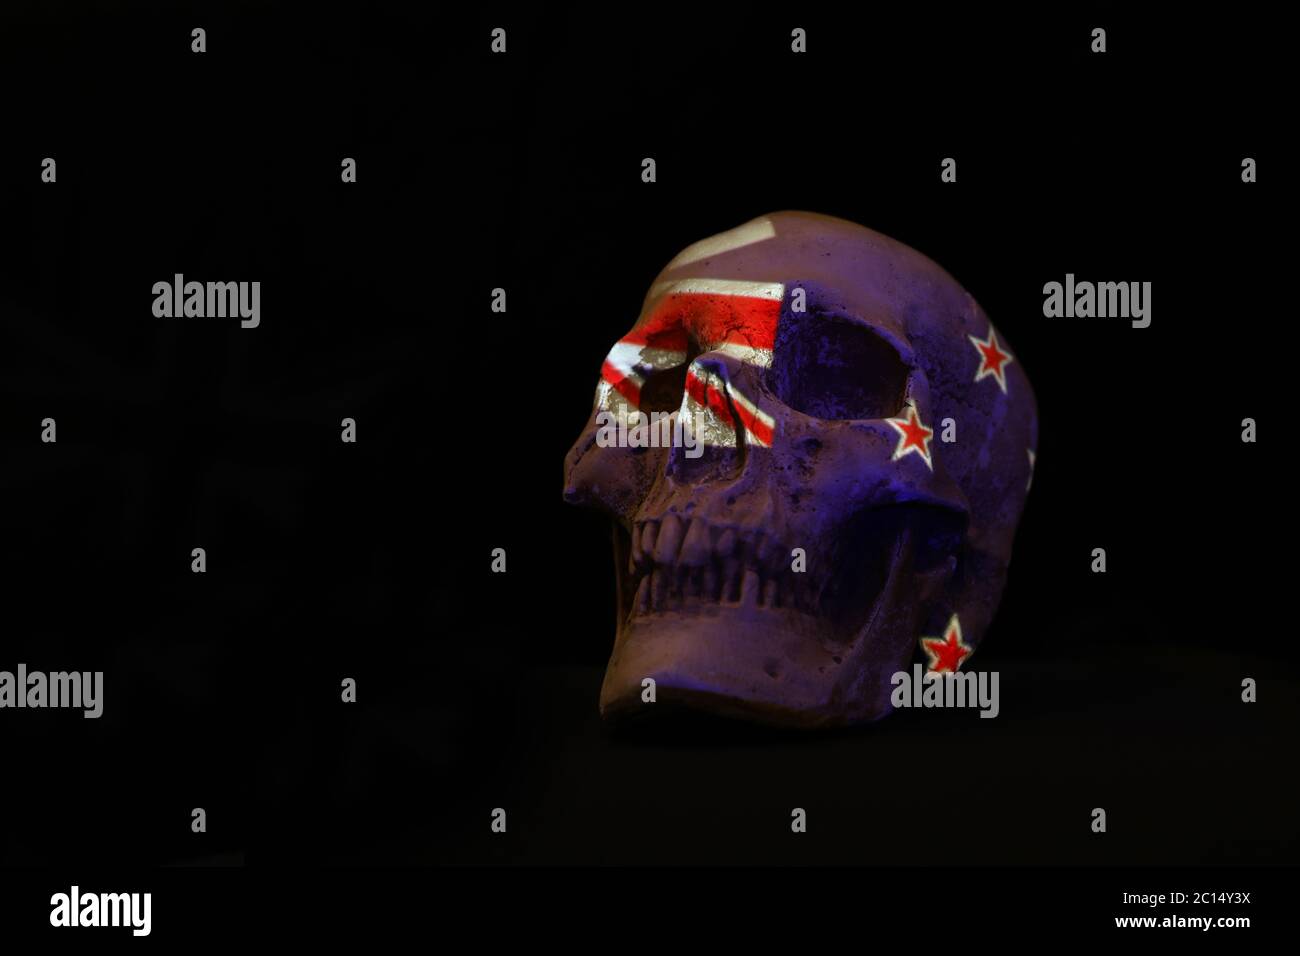 New Zealand national flag draped or projected over a white skull isolated against a plain black backgorund. Stock Photo